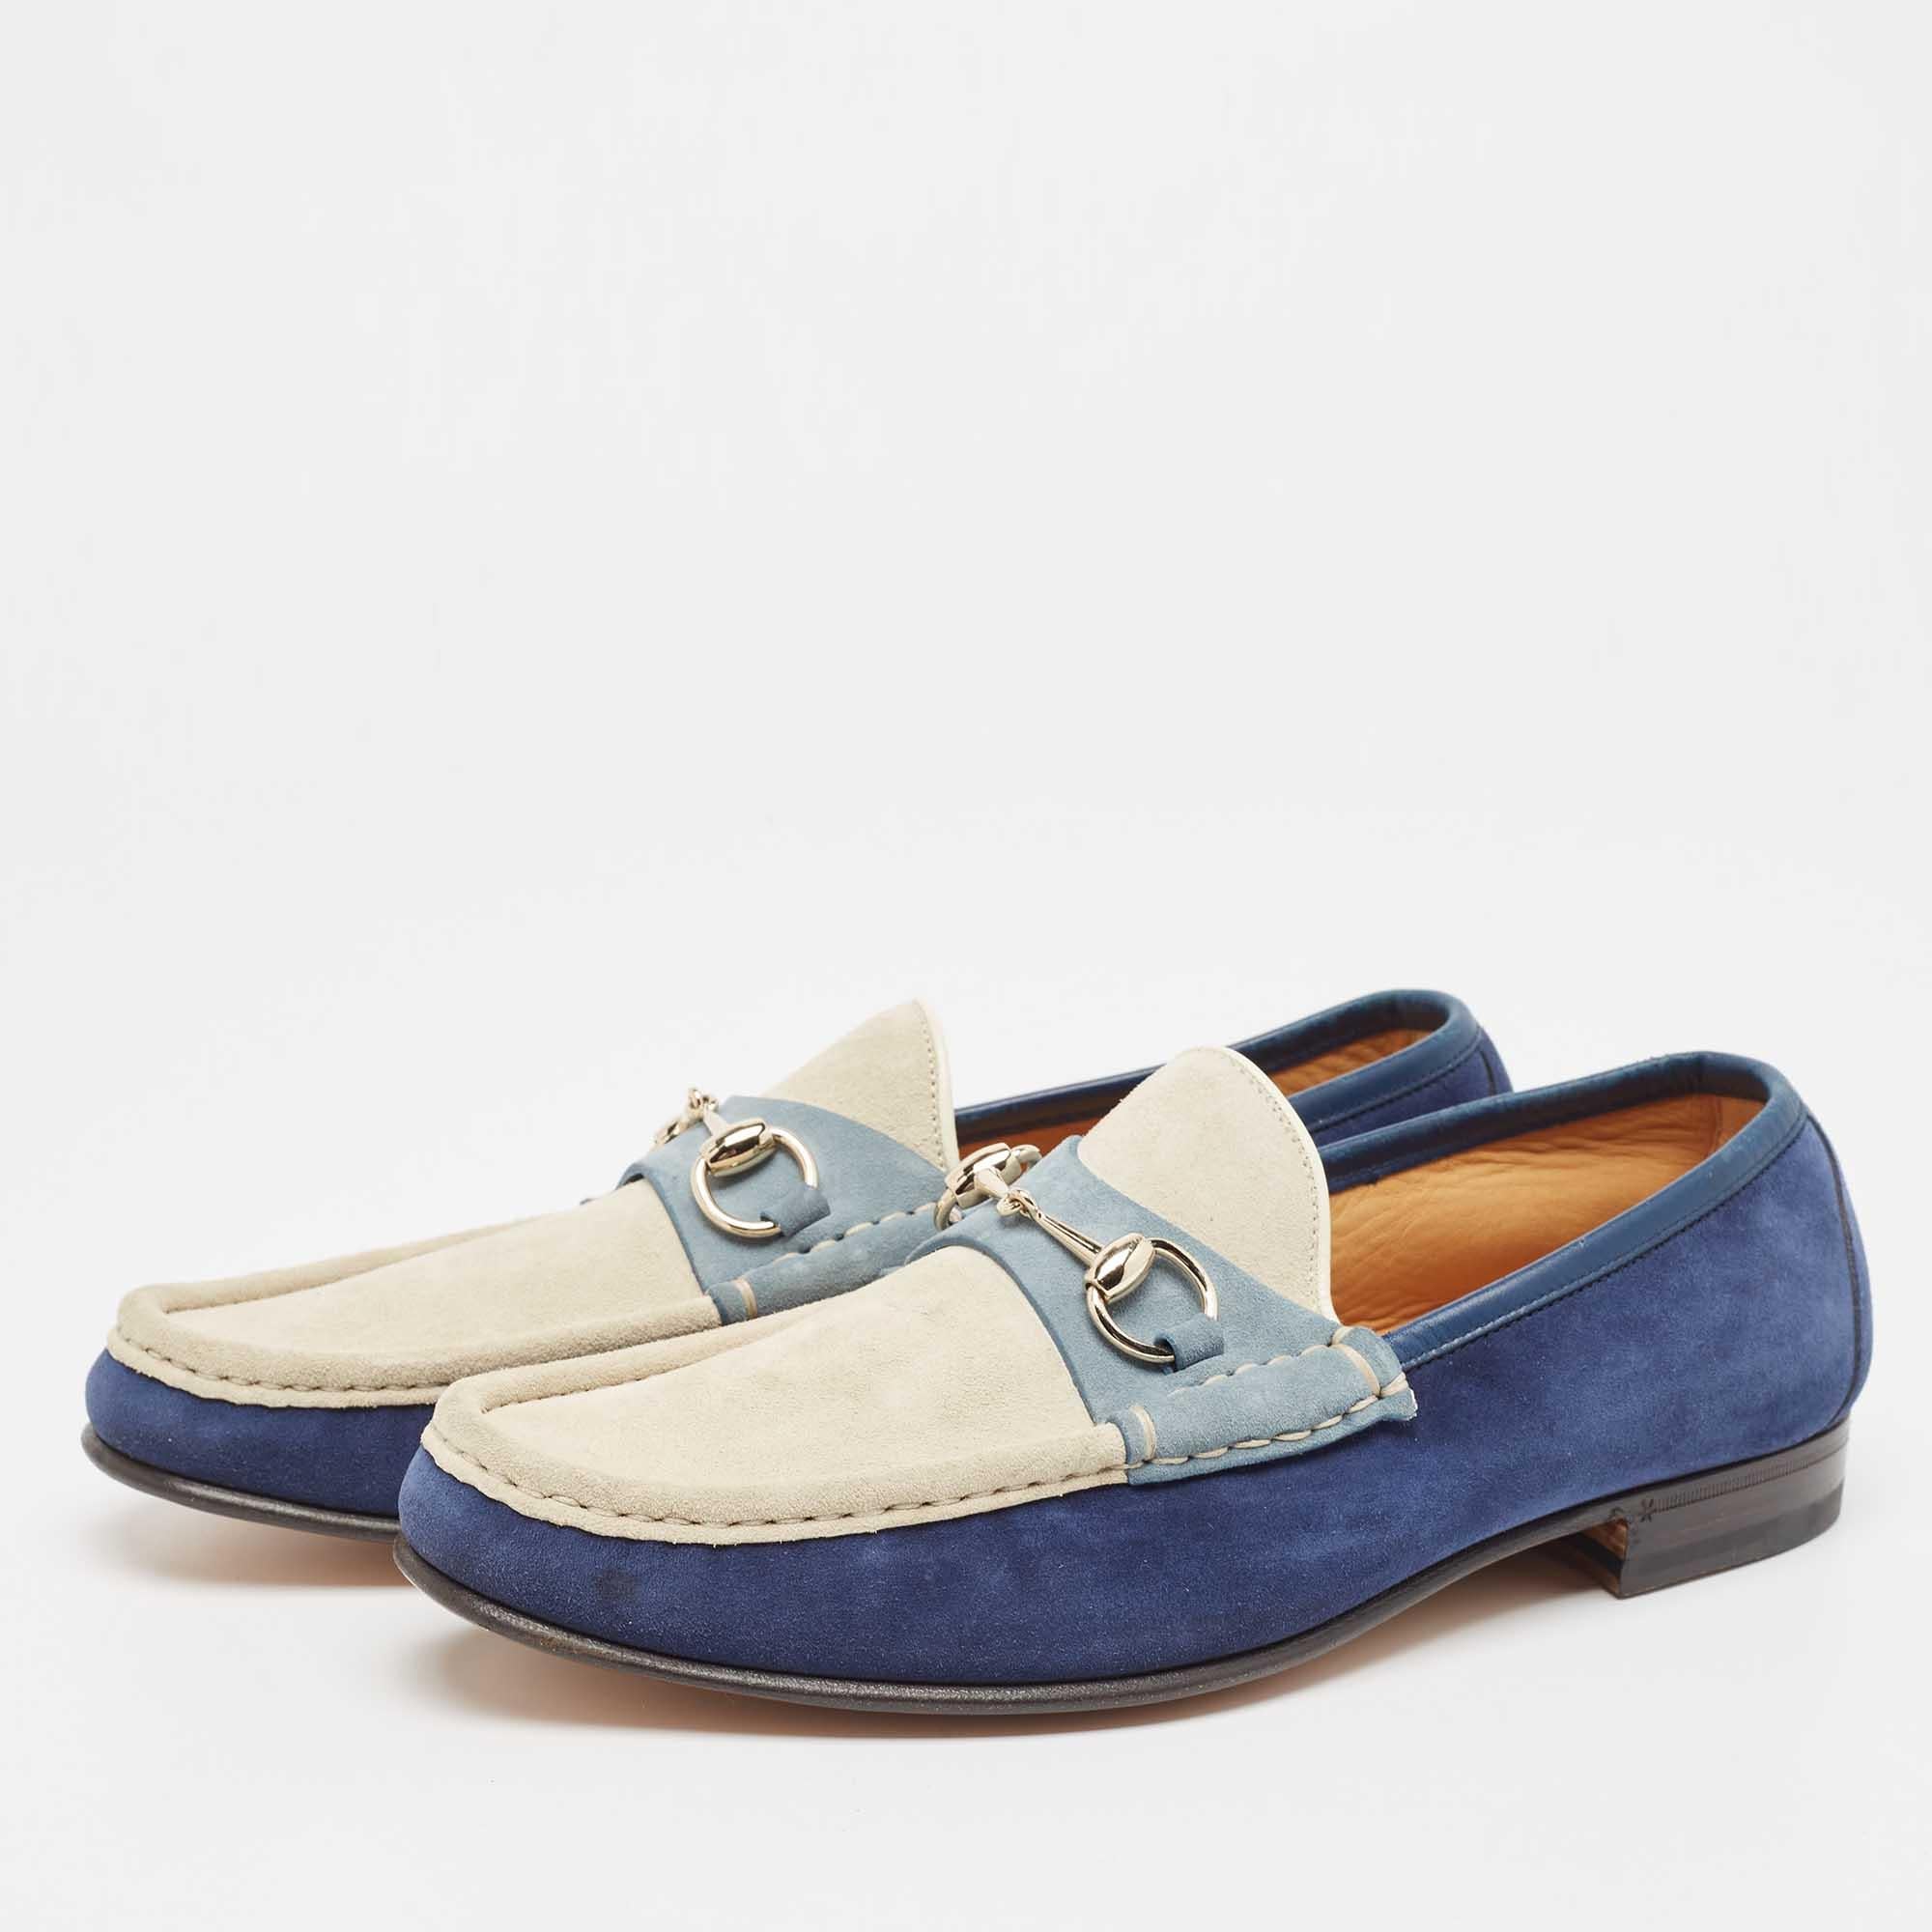 Purposely created to exude style and provide comfort wherever you go, this pair of loafers by Gucci is absolutely worth the buy! They've been crafted from suede, styled with Horsebit motif on the upper.

